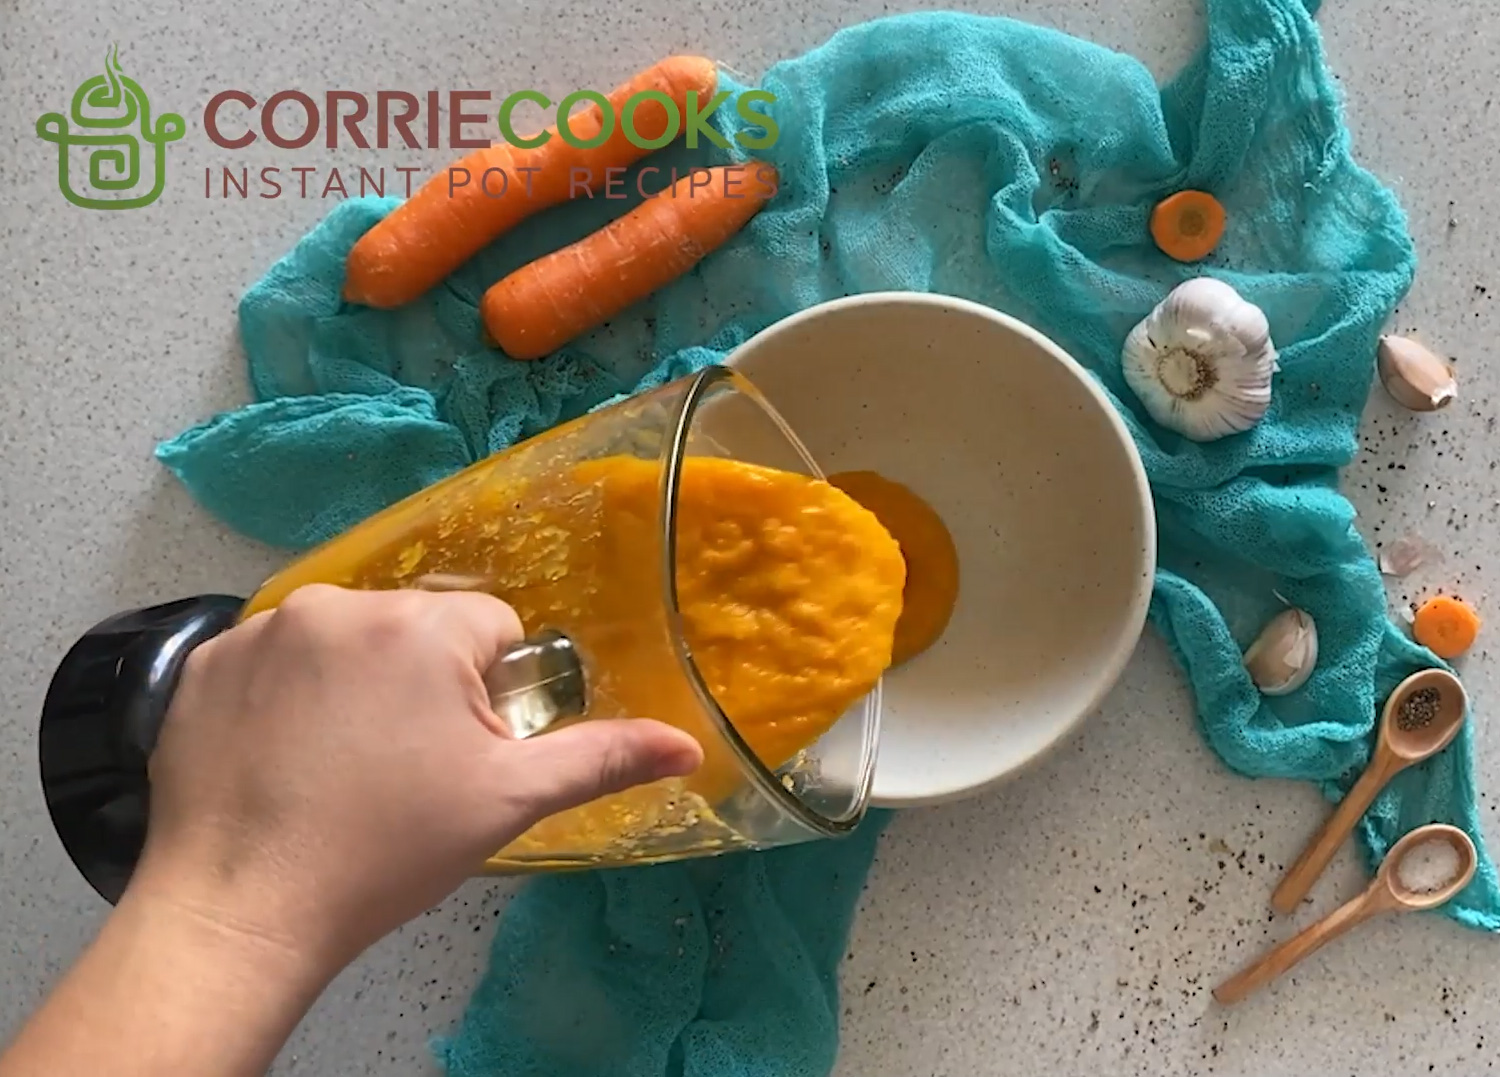 Pouring blended soup from a food processor into a bowl.